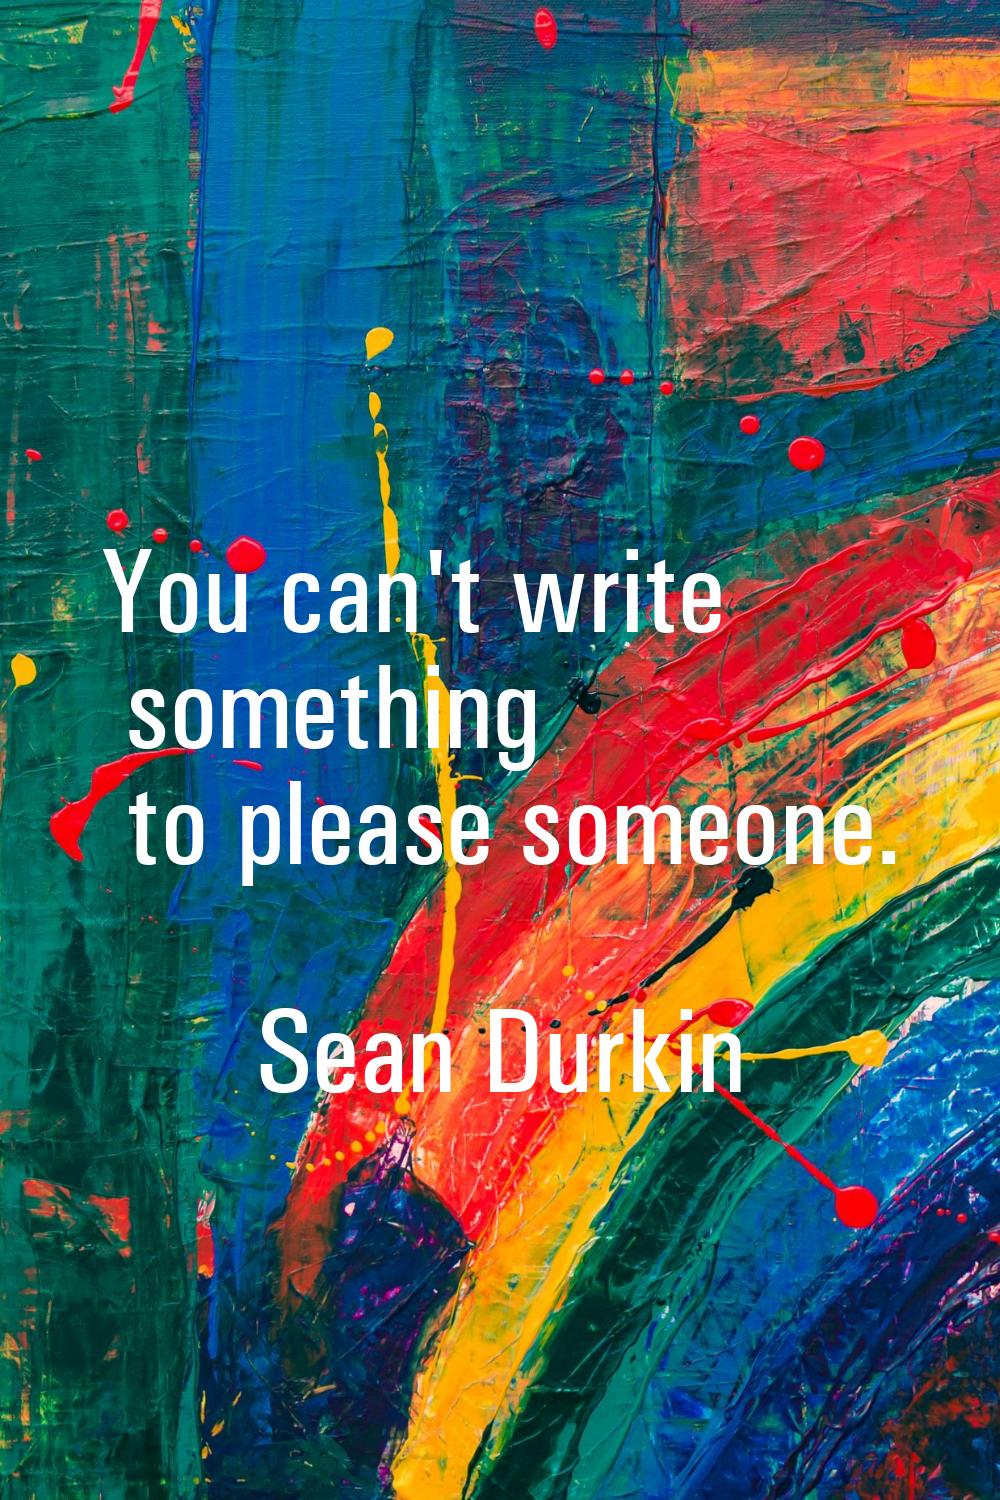 You can't write something to please someone.